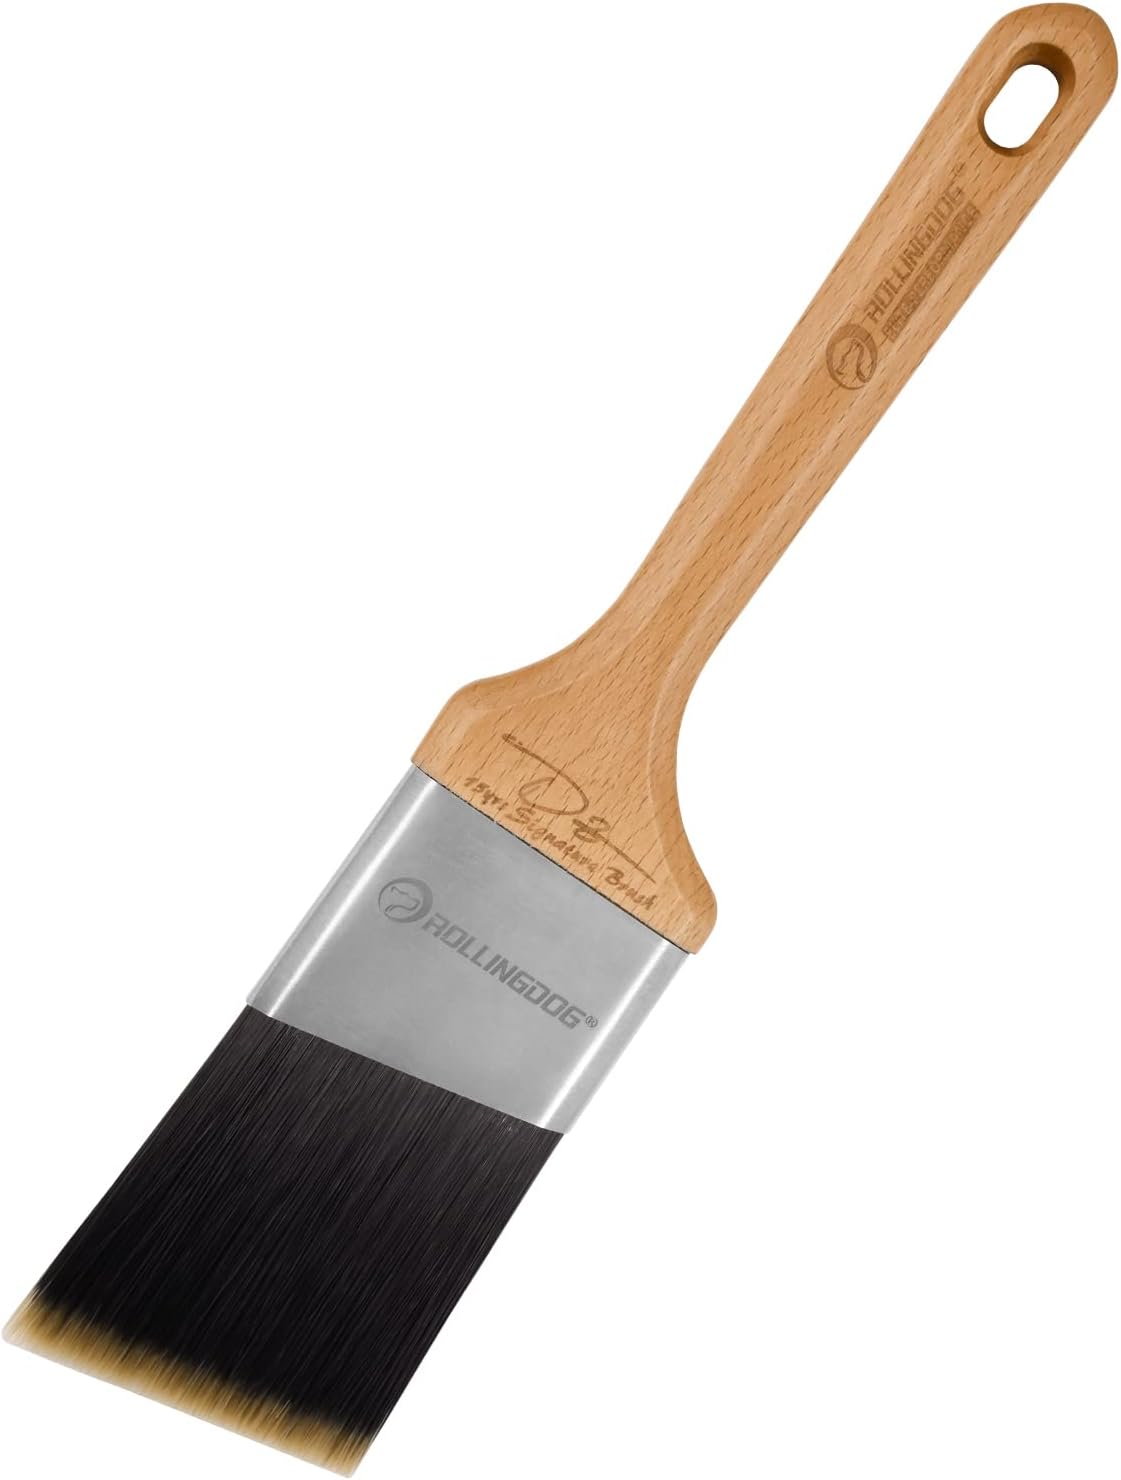 size paint brush for cutting in product review